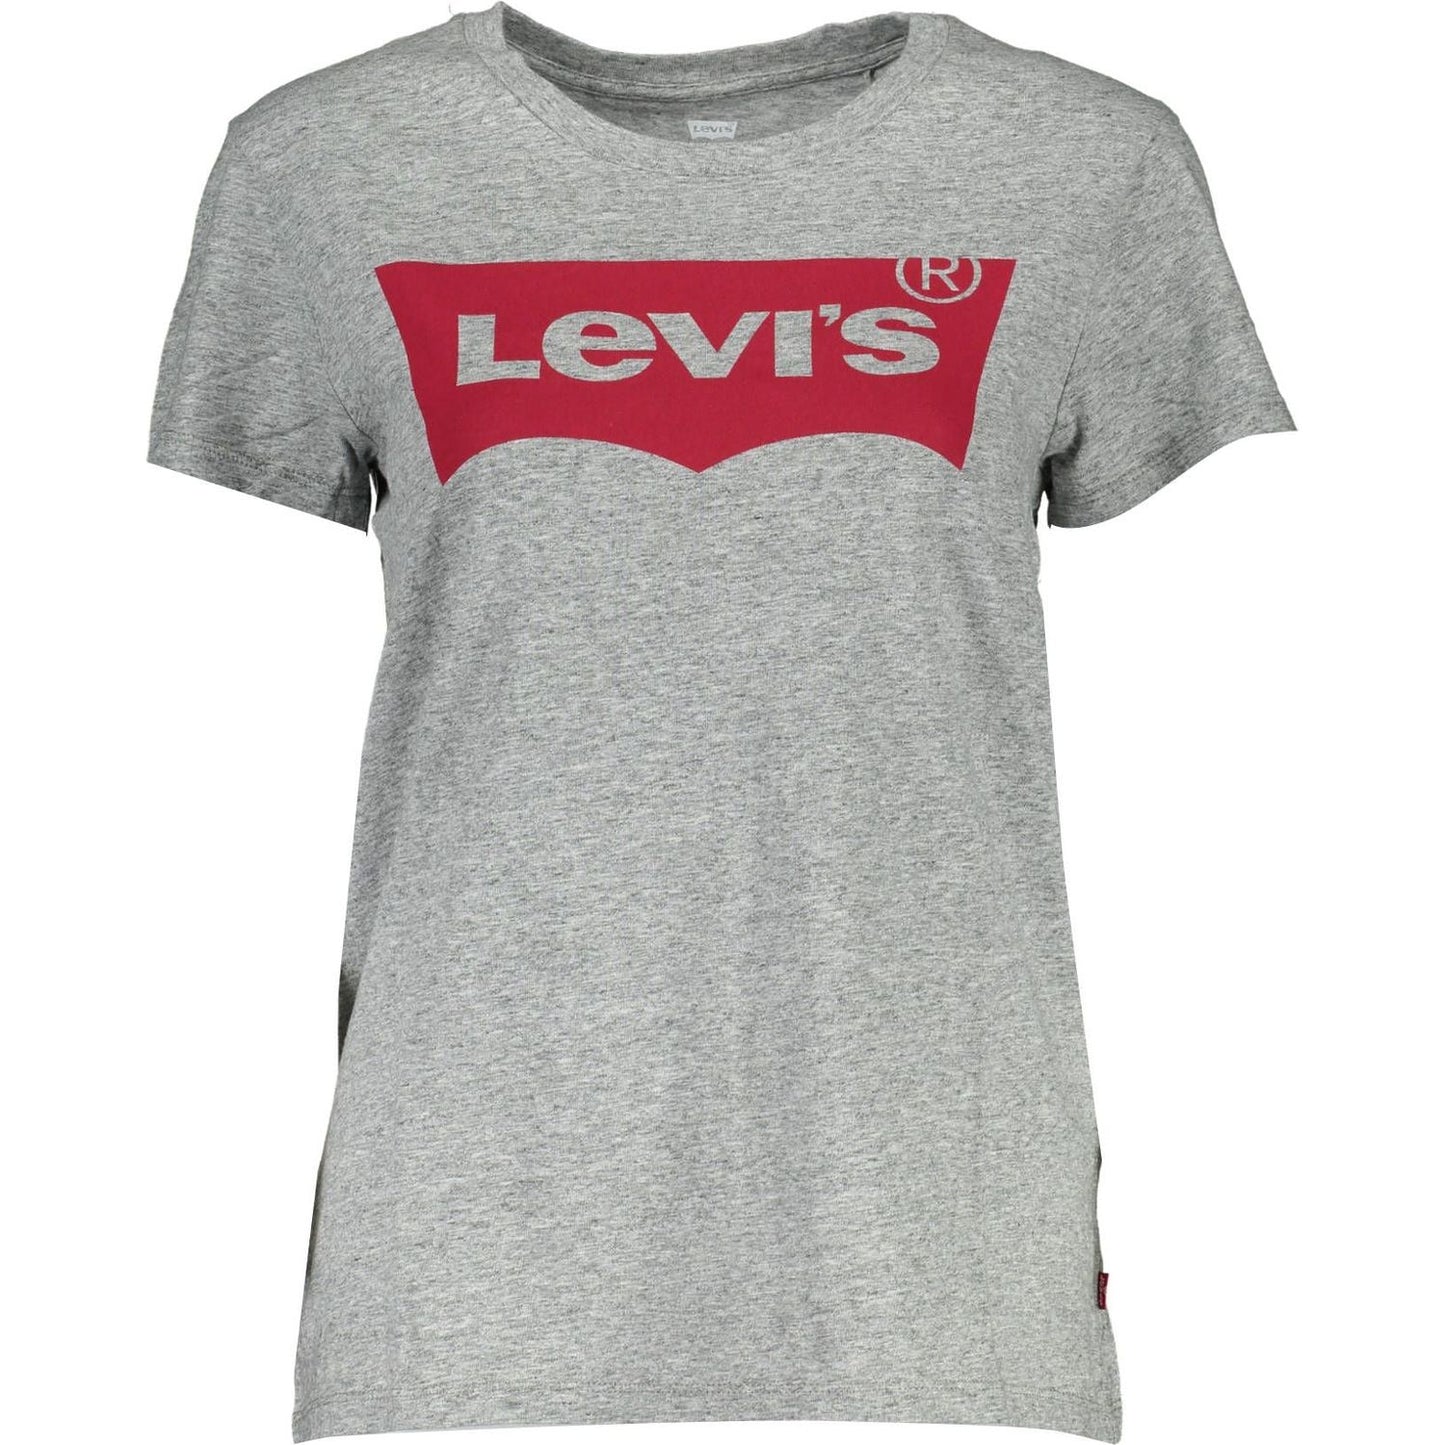 Levi's Chic Gray Printed Logo Cotton Tee for Women chic-gray-printed-logo-cotton-tee-for-women